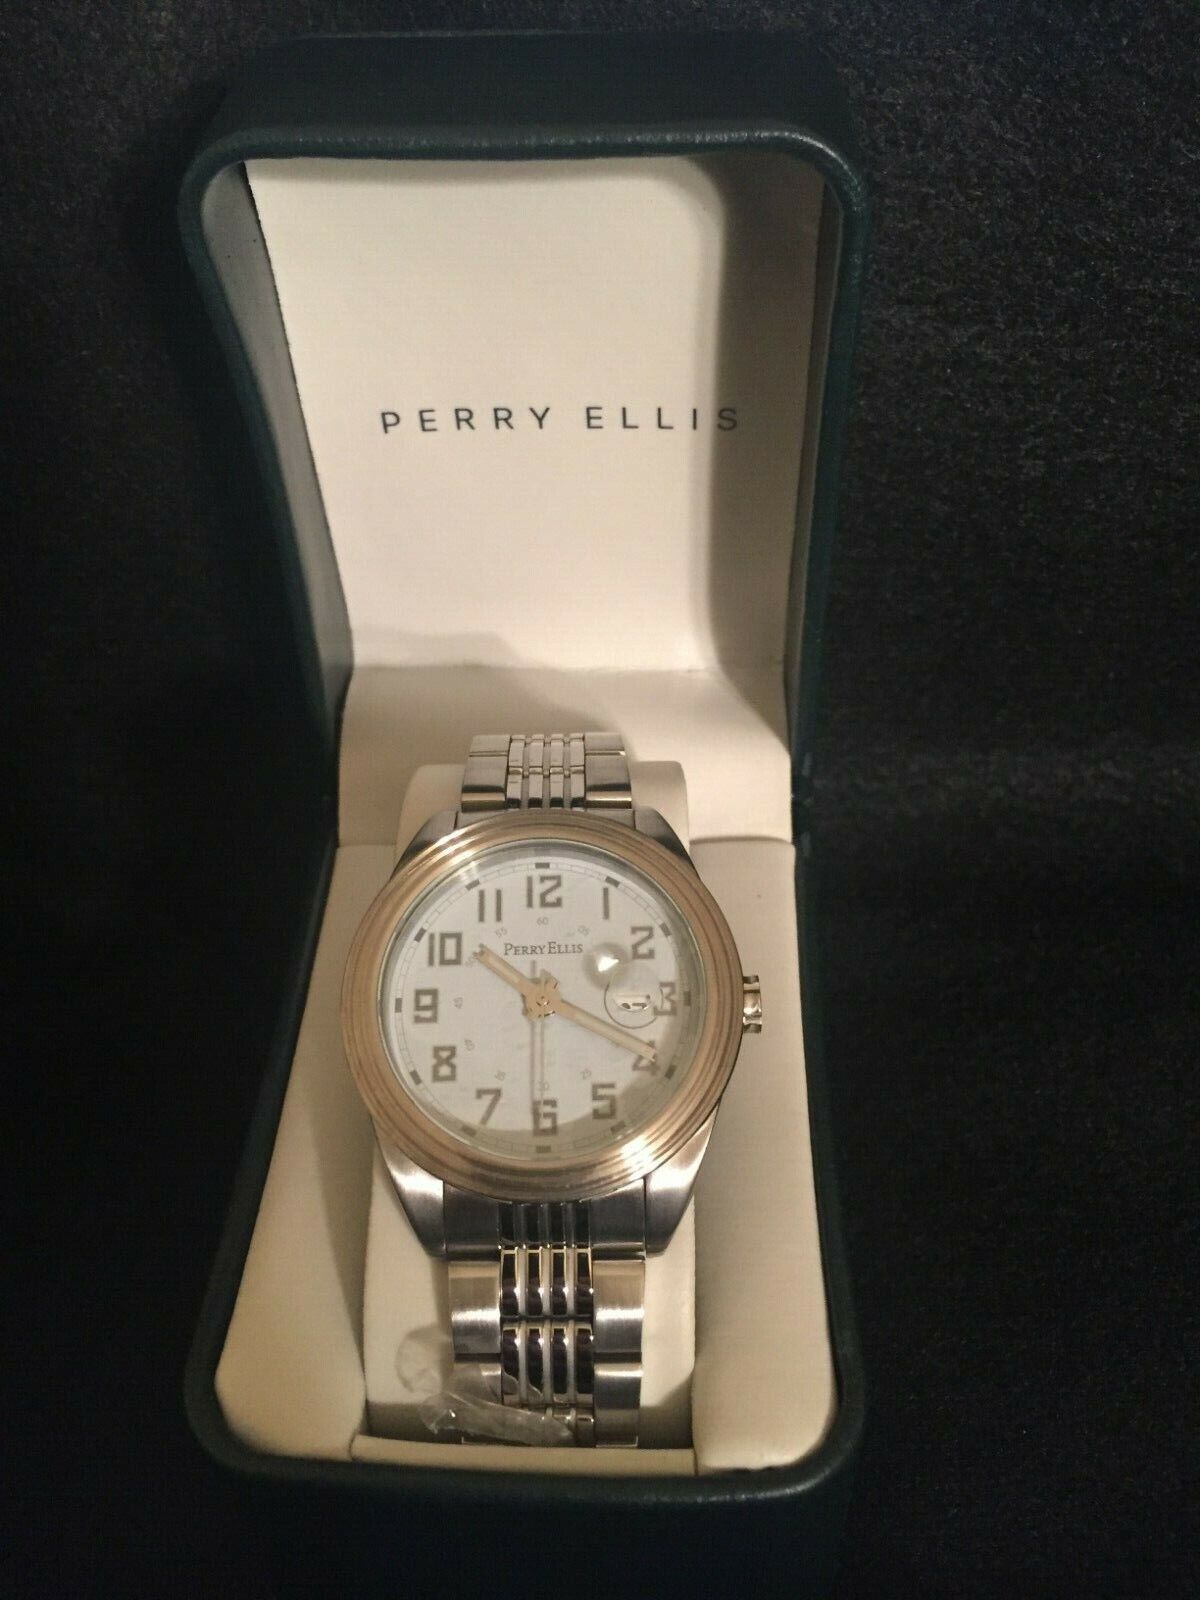 Perry Ellis - Men's Stainless Steel Watch with Date - New in Box - PEM0039